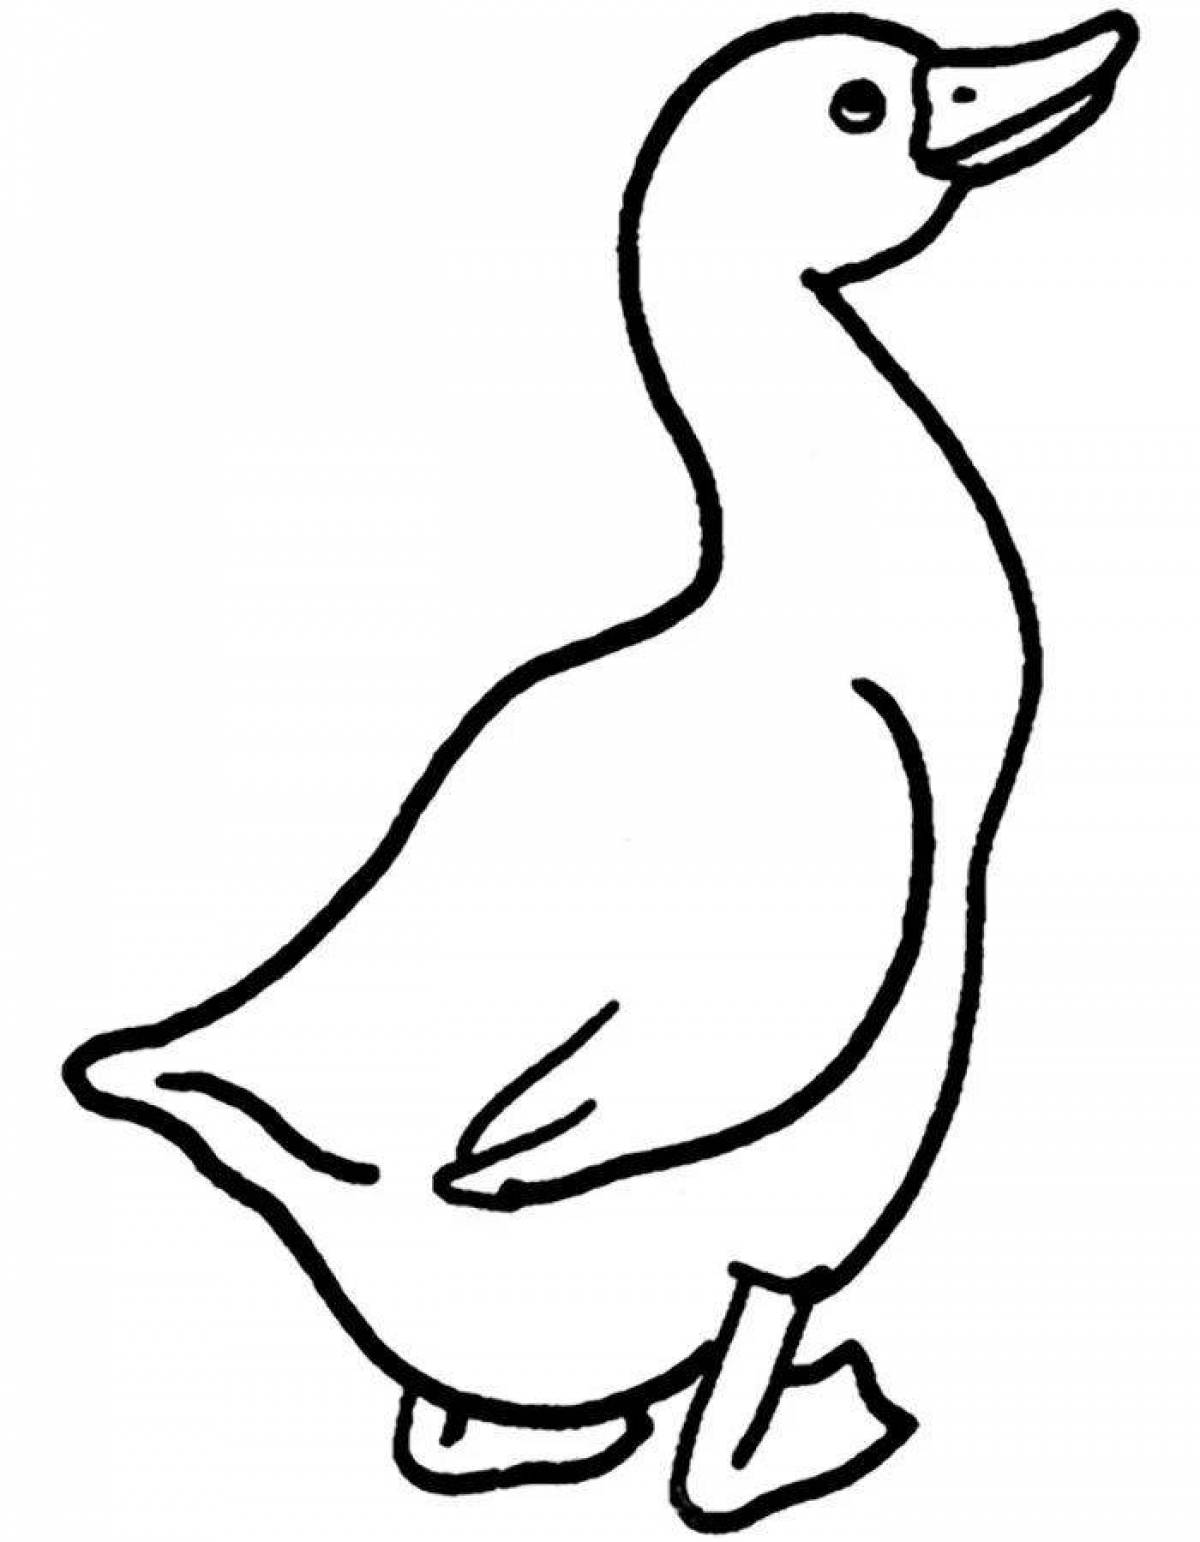 Coloring page festive gosling